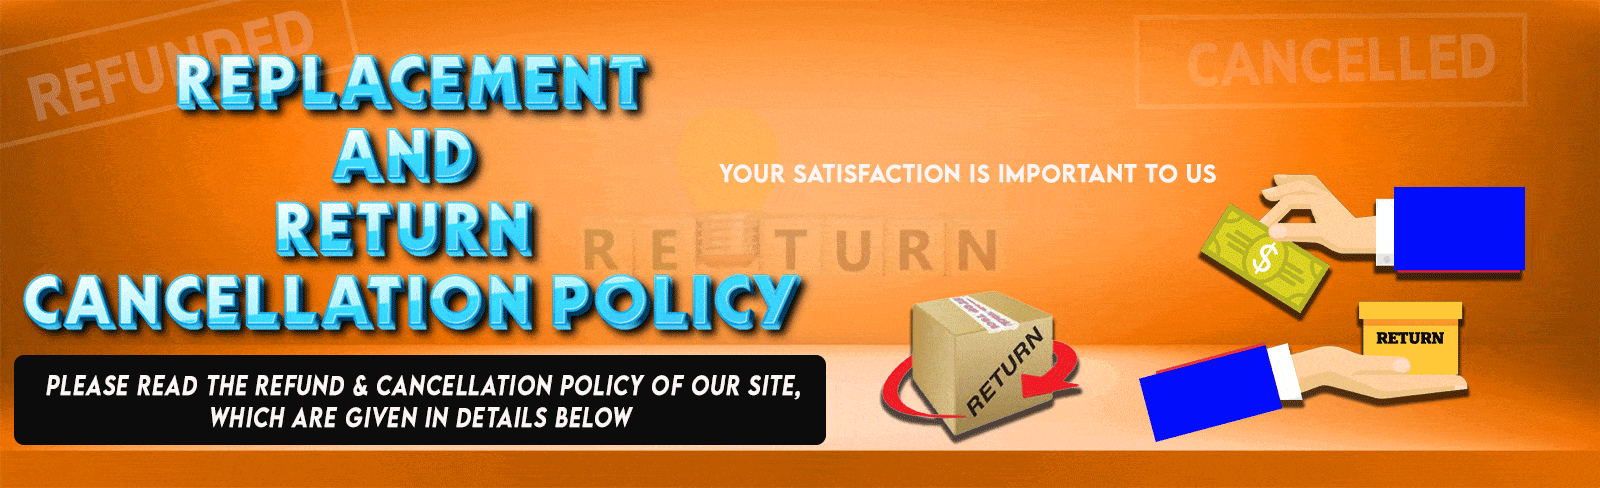 Replacement And Return Cancellation Policy Desktop Banner